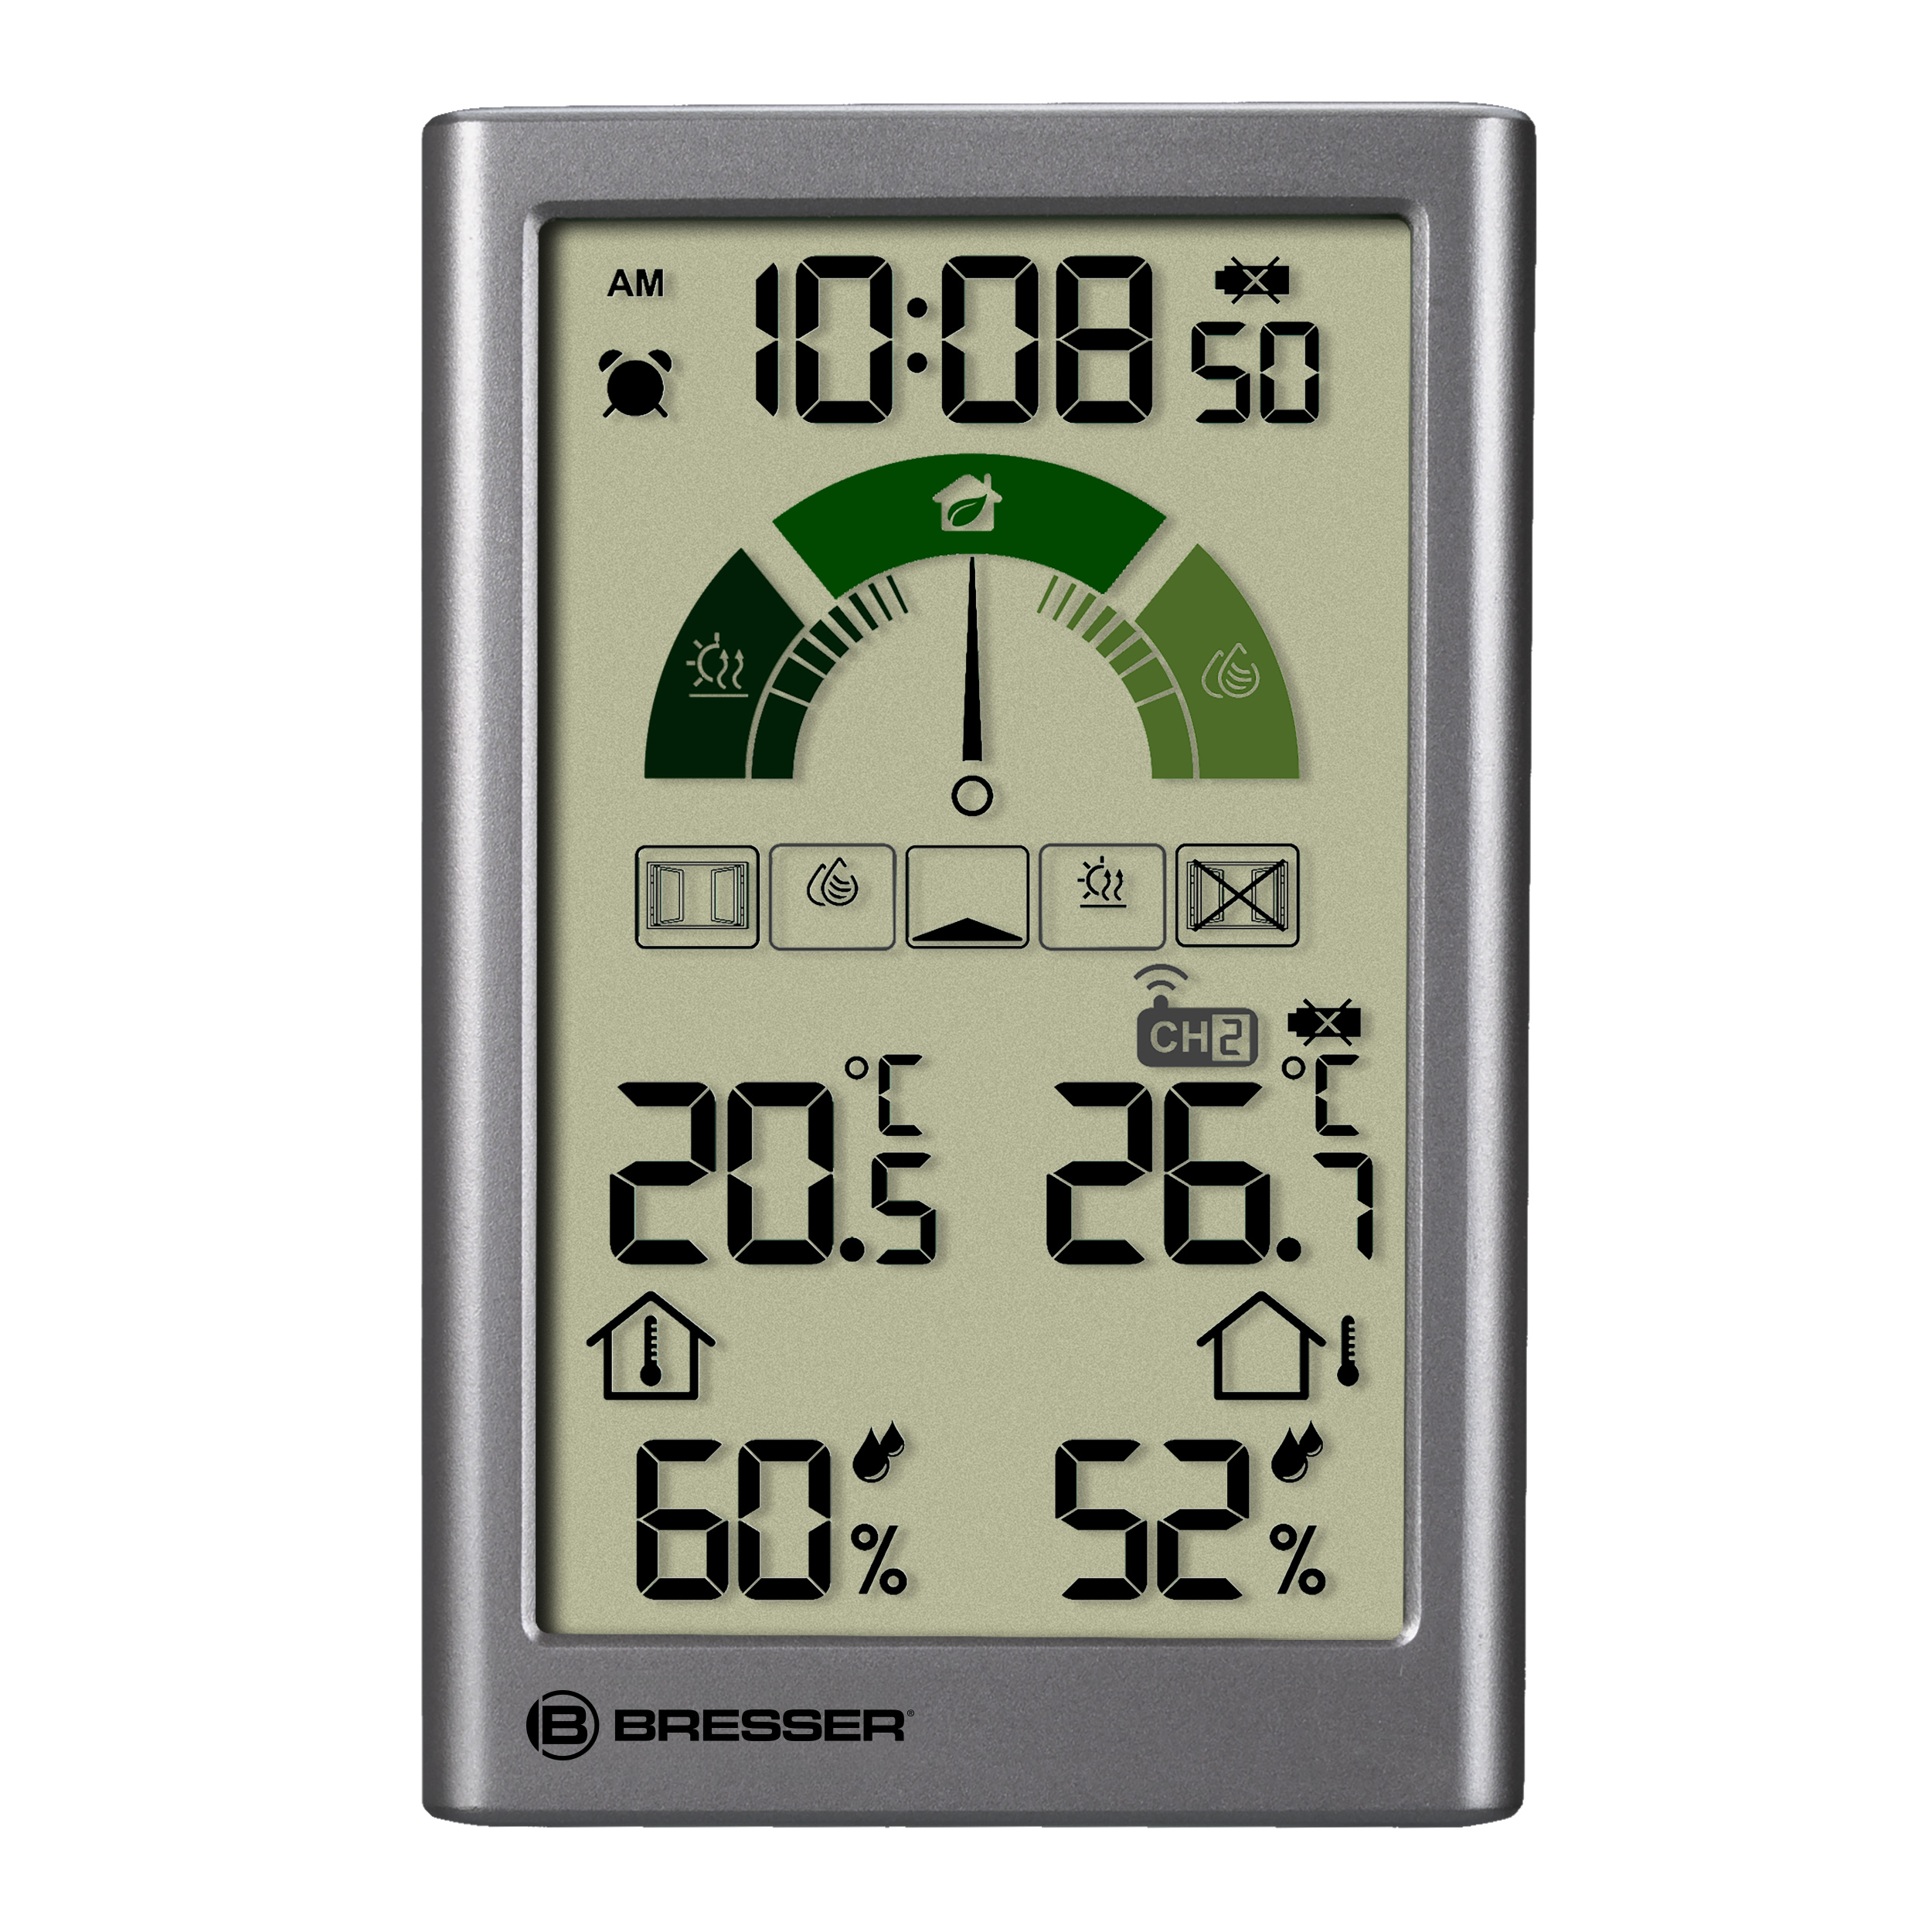 BRESSER Thermo-Hygrometer with Ventilation Recommendation VentAir V